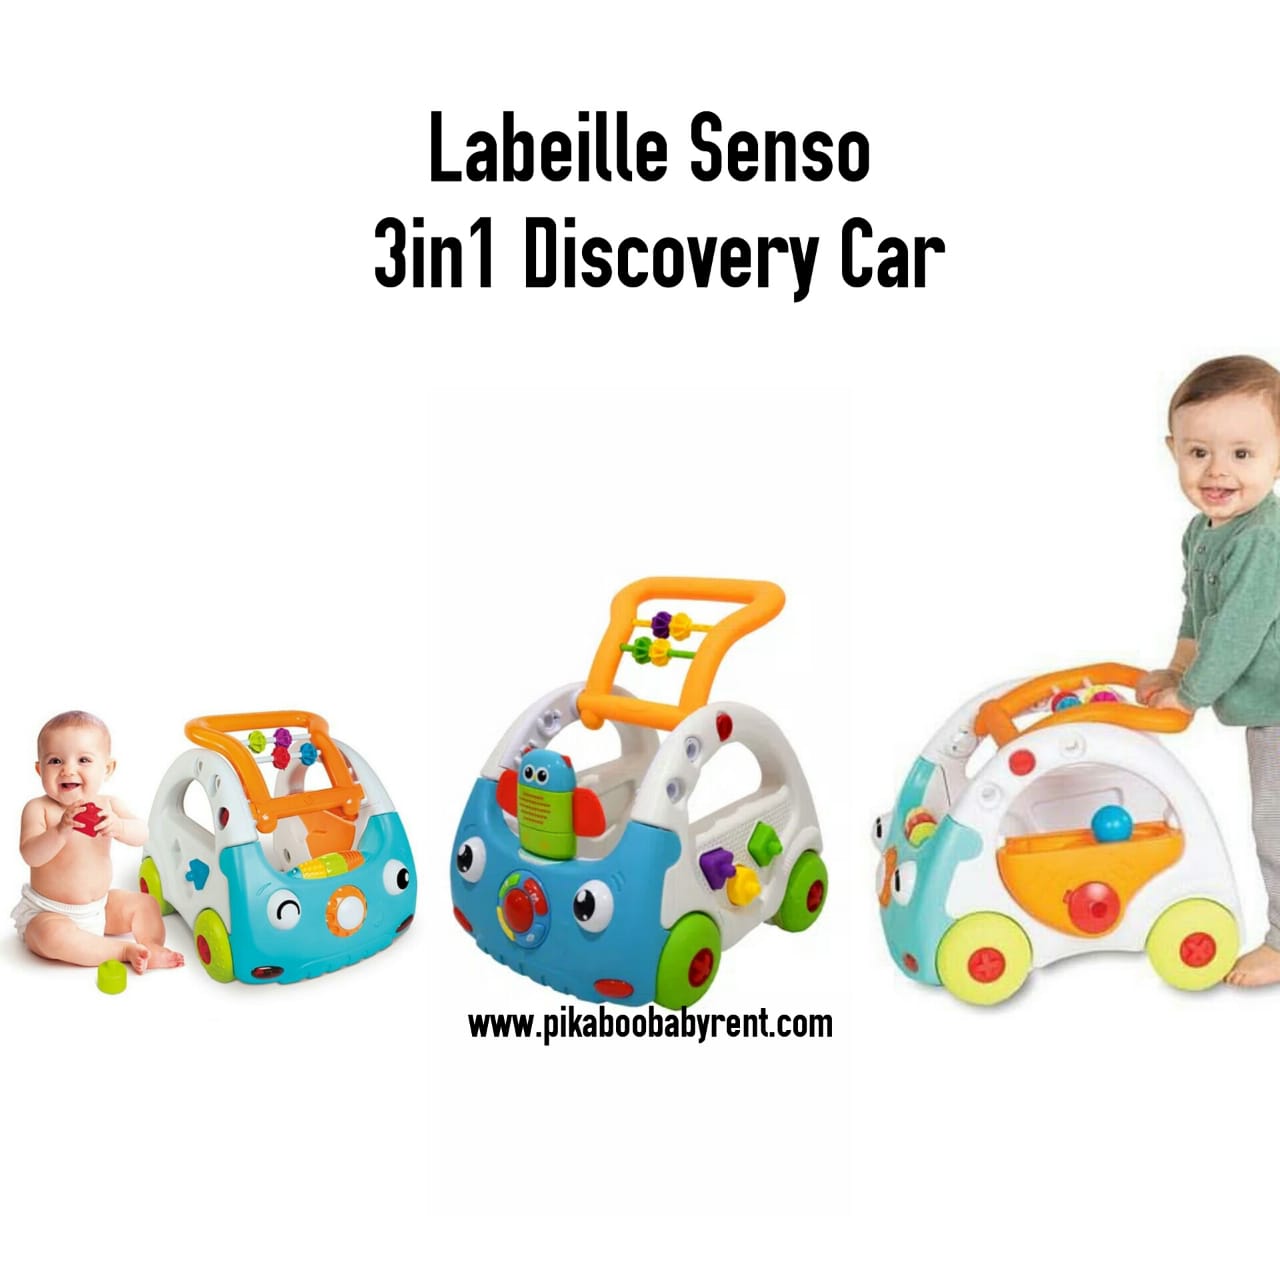 LABEILLE SENSO 3IN1 DISCOVERY CAR